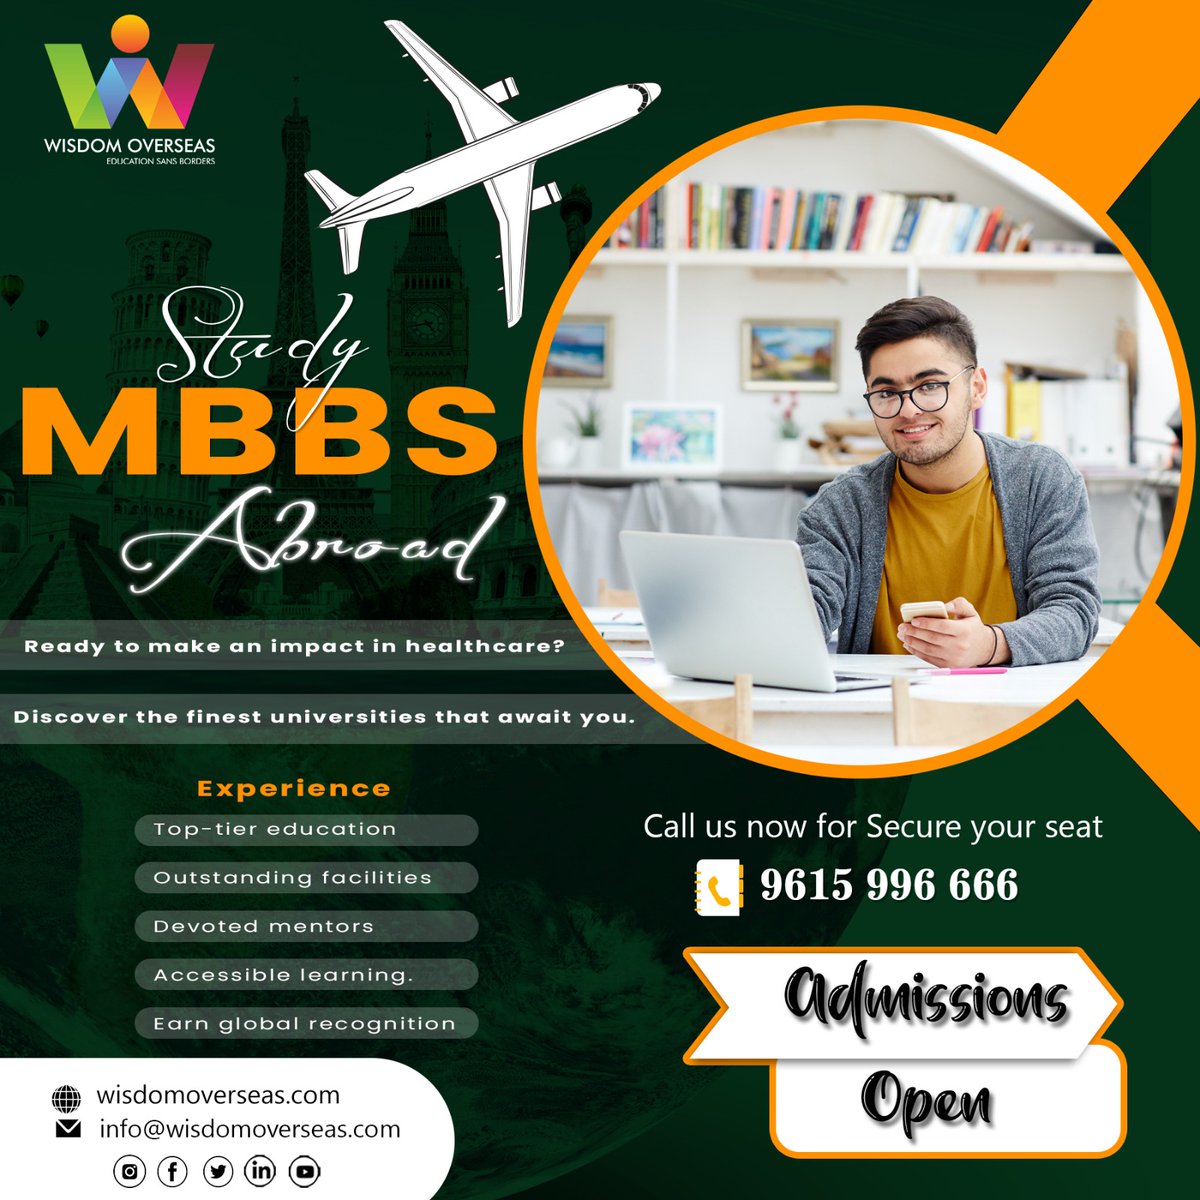 Ready to revolutionize healthcare? Discover premier universities offering MBBS programs abroad!
Call us at 9615996666 
Admissions open!
VISIT:wisdomoverseas.com
Subscribe Link: bit.ly/375P22M
#mbbsabroad #StudyMBBSAbroad #mbbsabroadforindianstudents  #WisdomOverseas